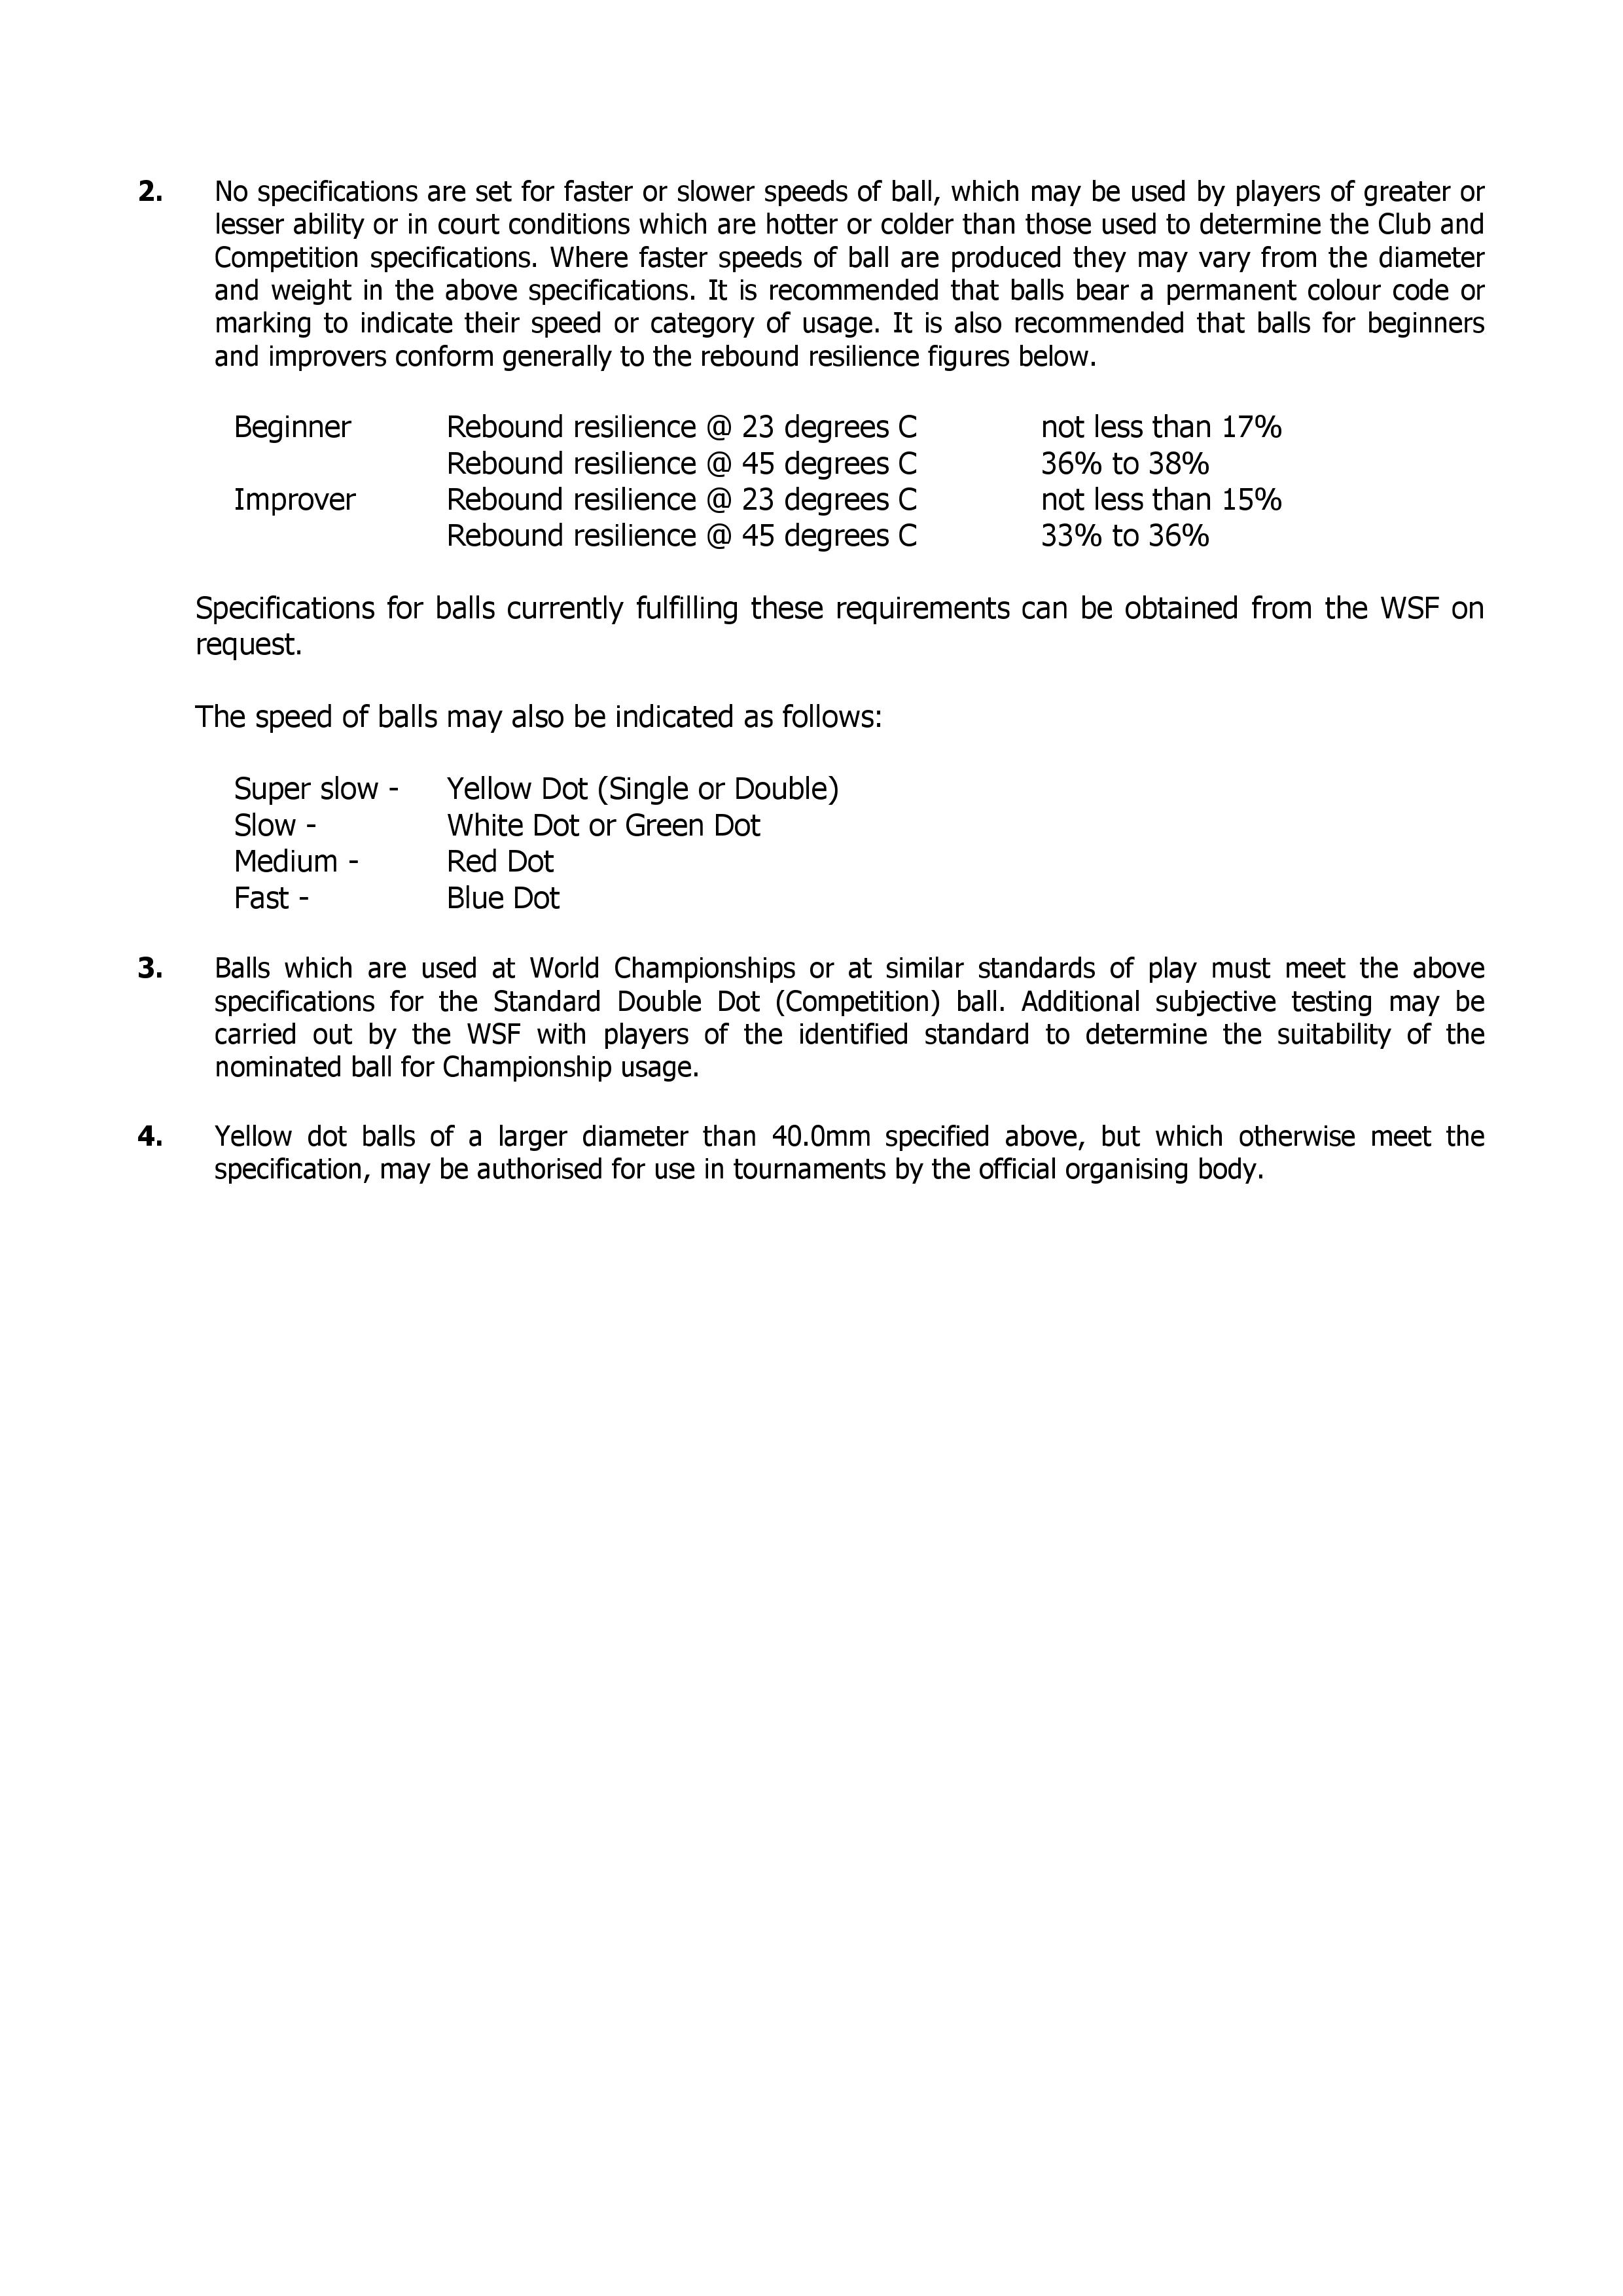 World Squash Federation Ball Specification Rules - Global Squash Coach - Page 3.jpg